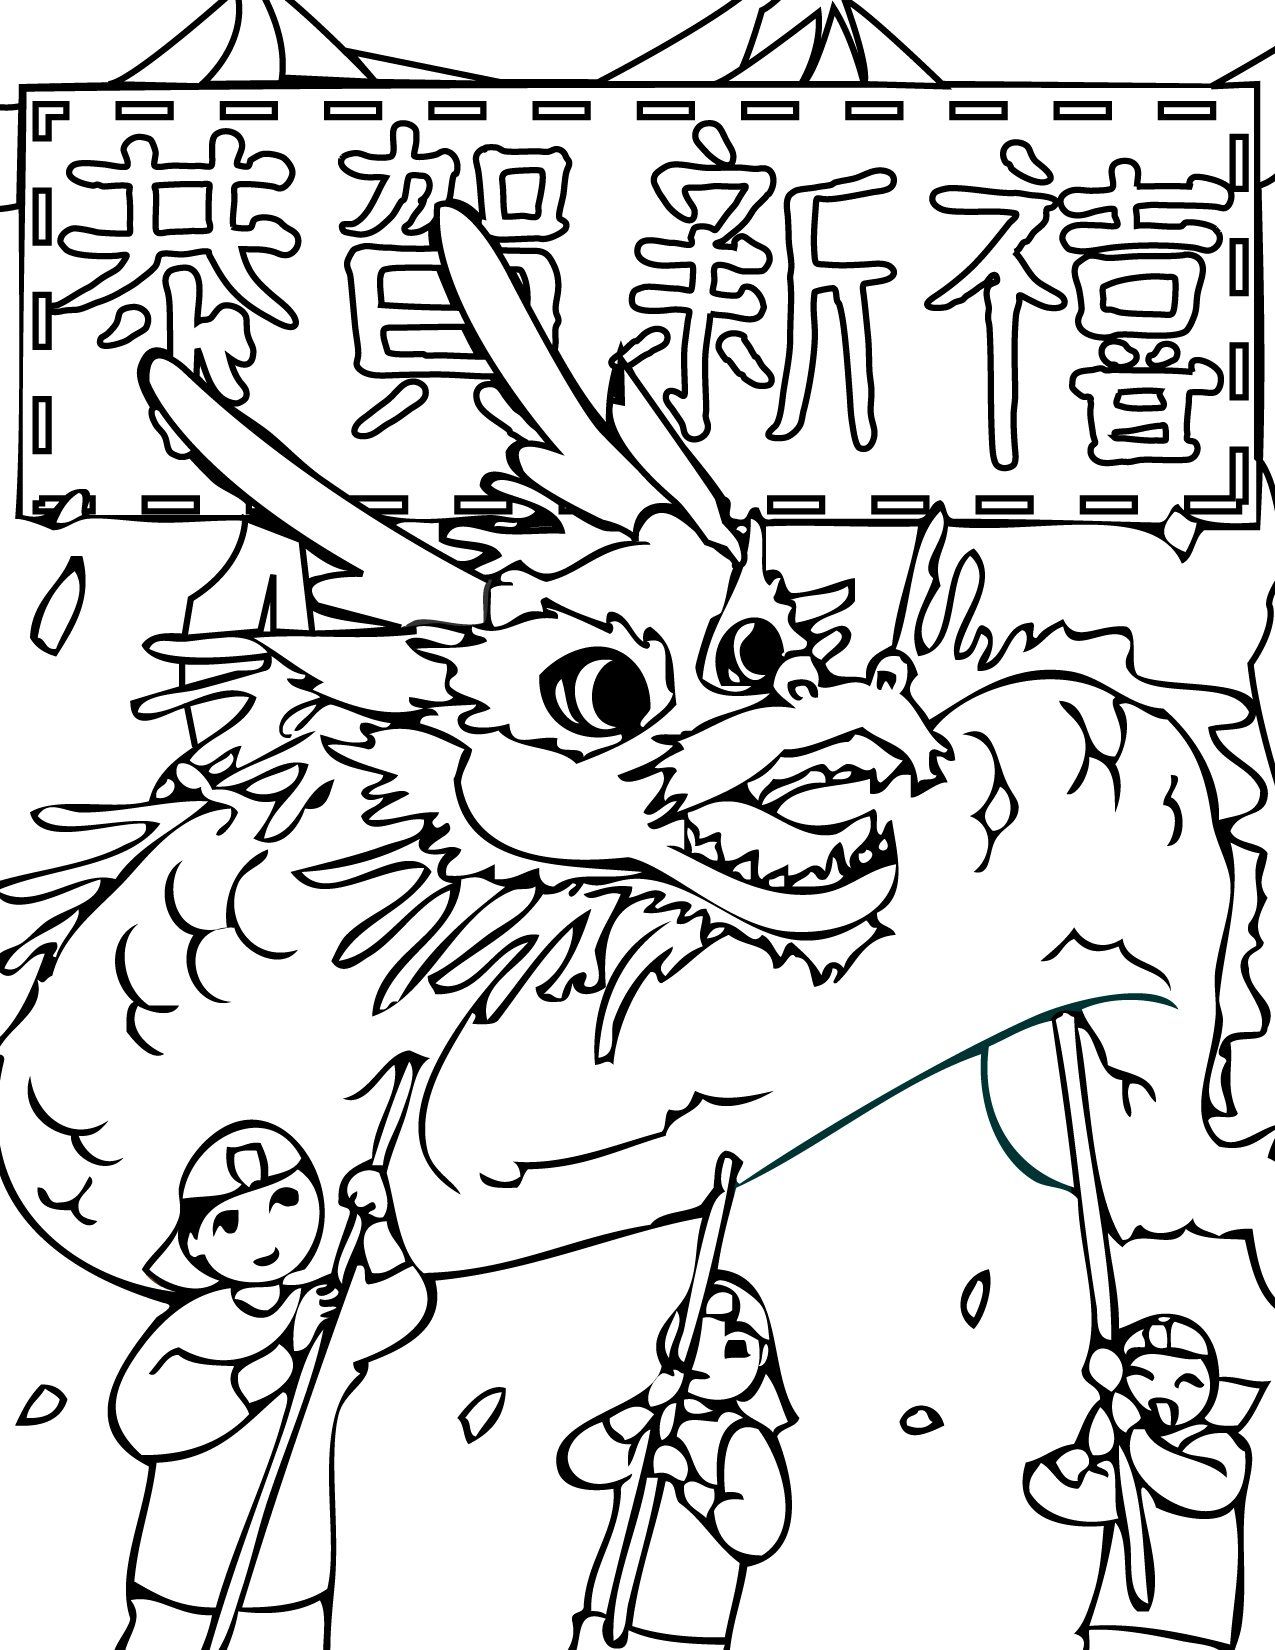 Download Chinese New Year Coloring Pages - Best Coloring Pages For Kids